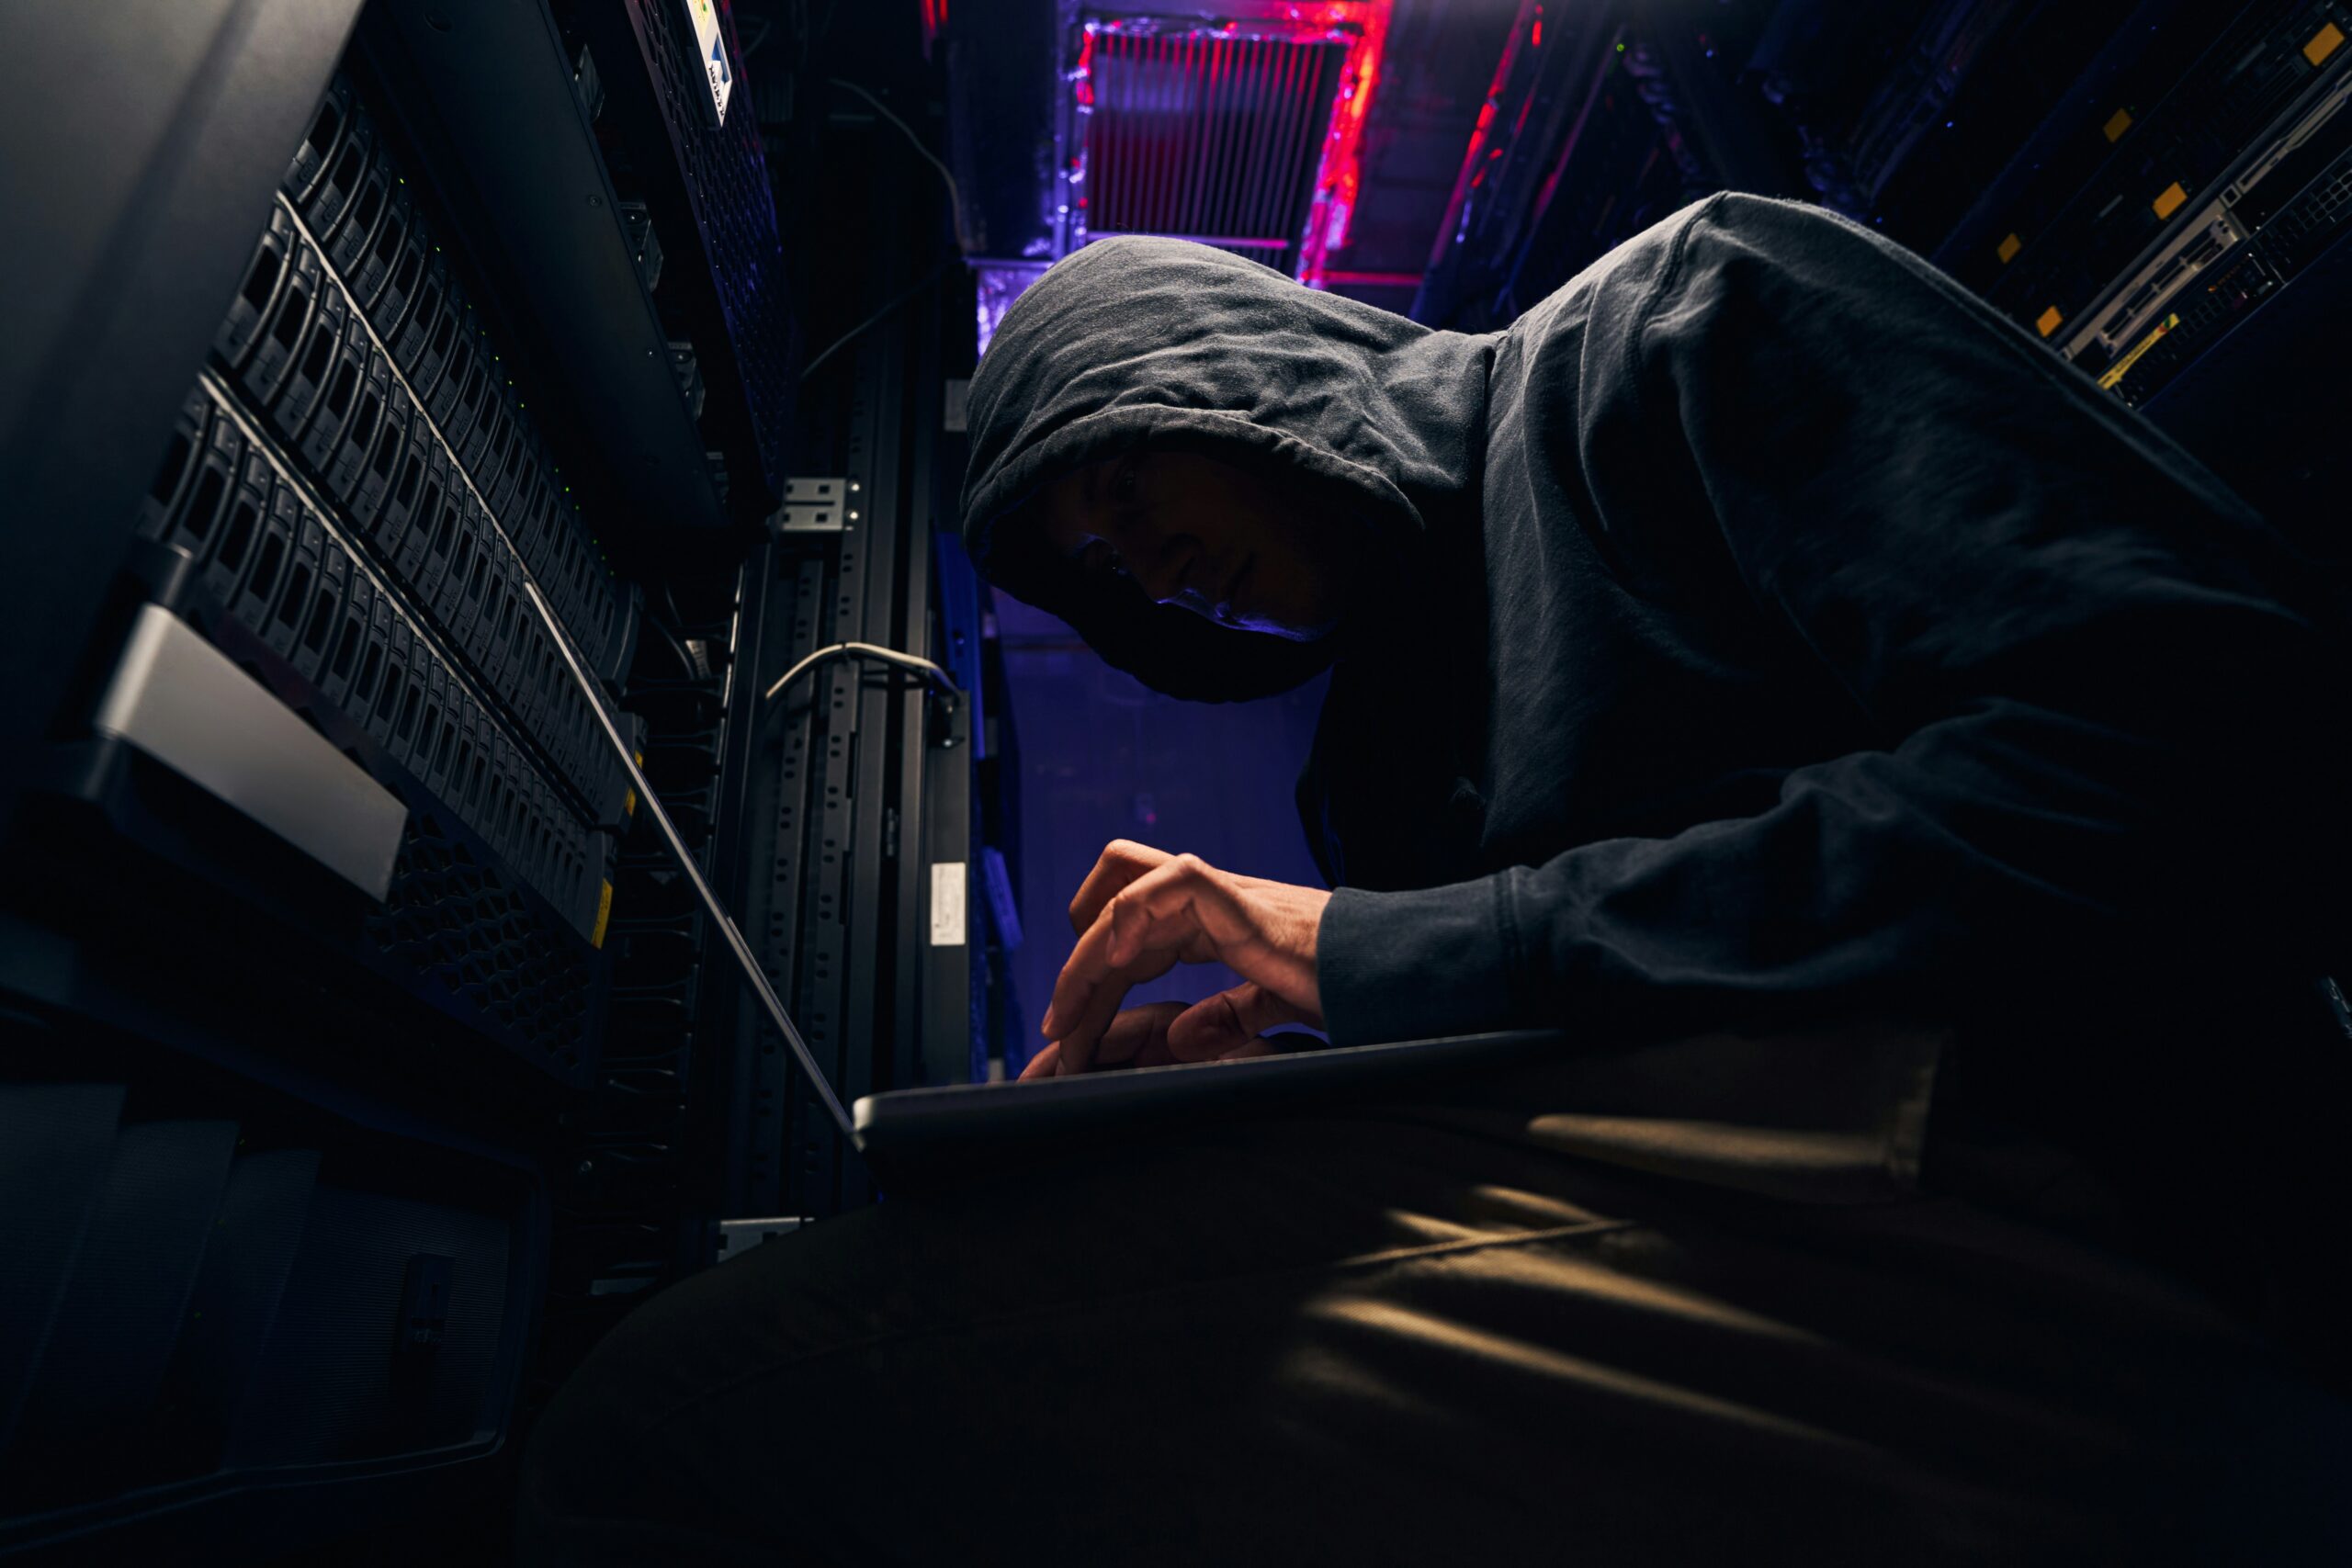 A man wearing a hoodie engages in intense typing on a laptop, skills honed to survive potential cyber attacks.